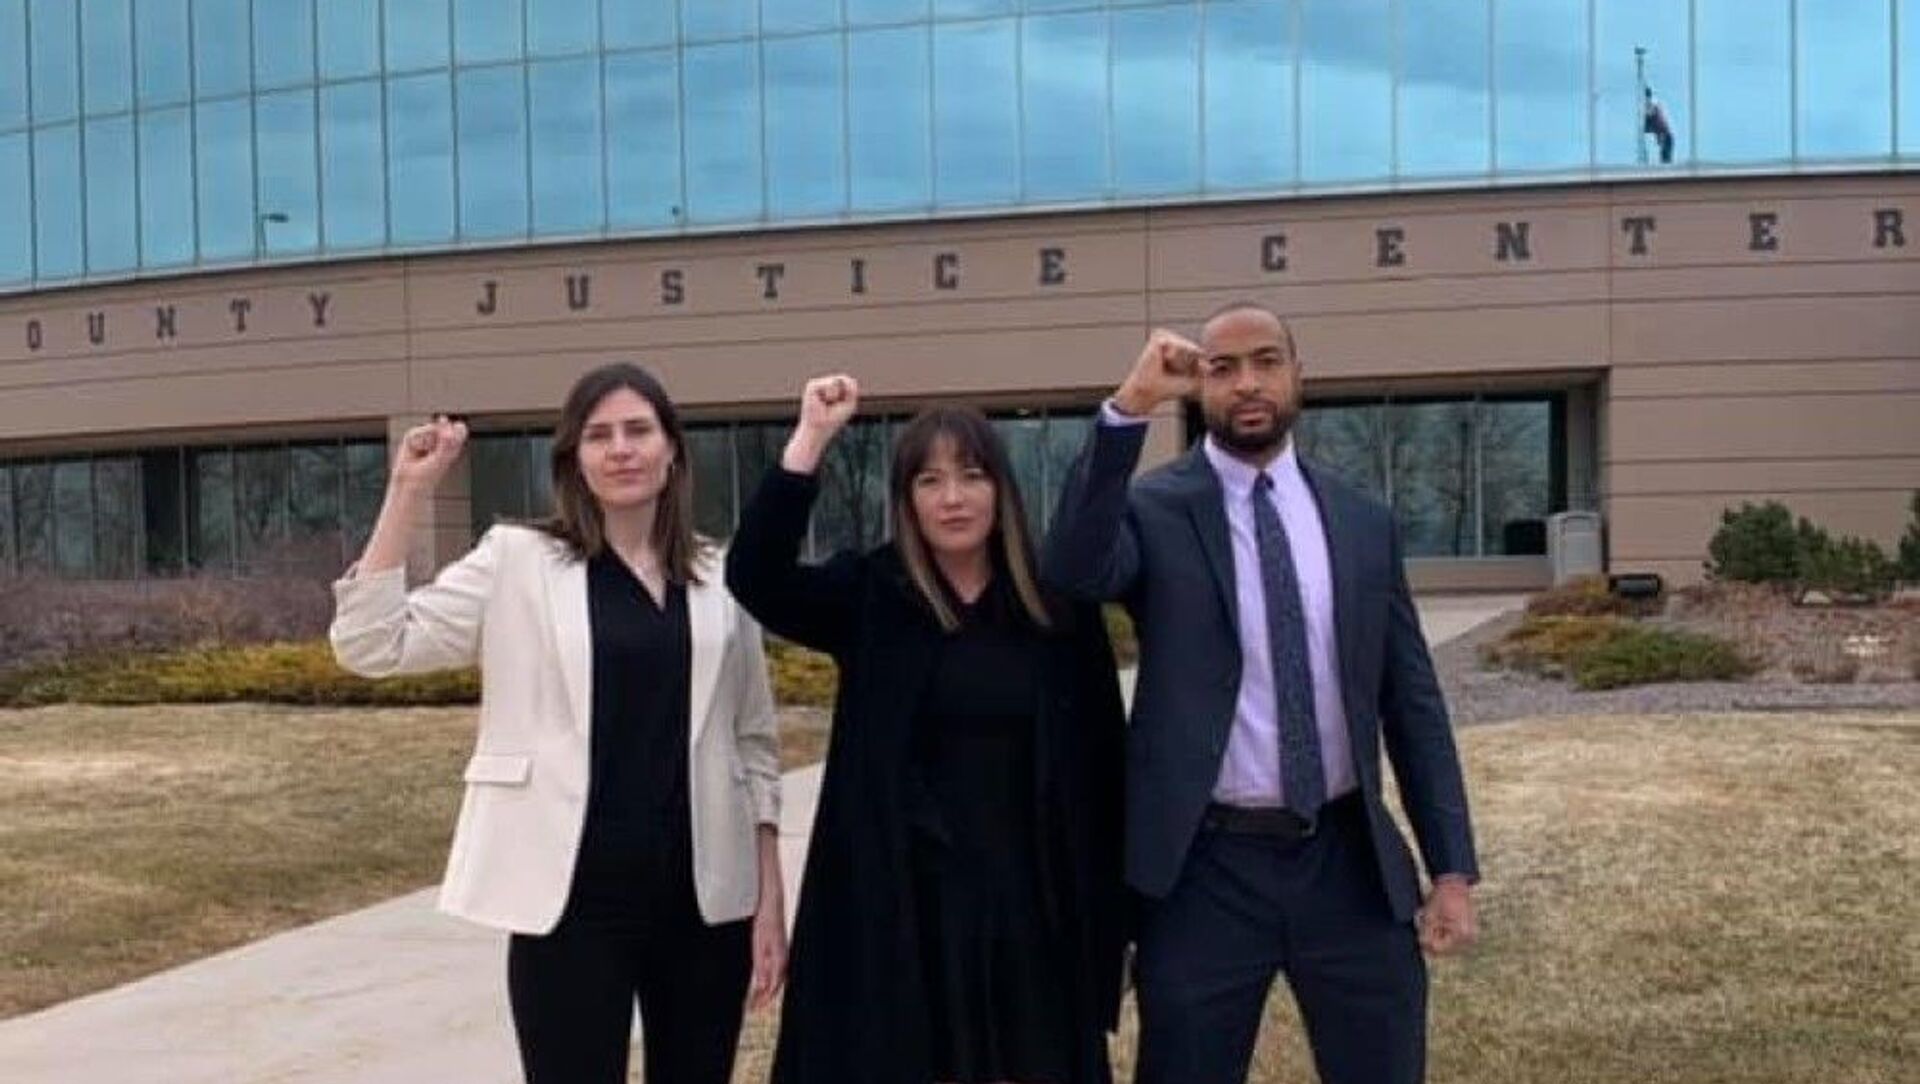 Activists Lillian House, Joel Northam and Eliza Lucero head to a pretrial hearing in Aurora, Colorado, for charges stemming from a July 2020 Black Lives Matter protest - Sputnik International, 1920, 25.03.2021